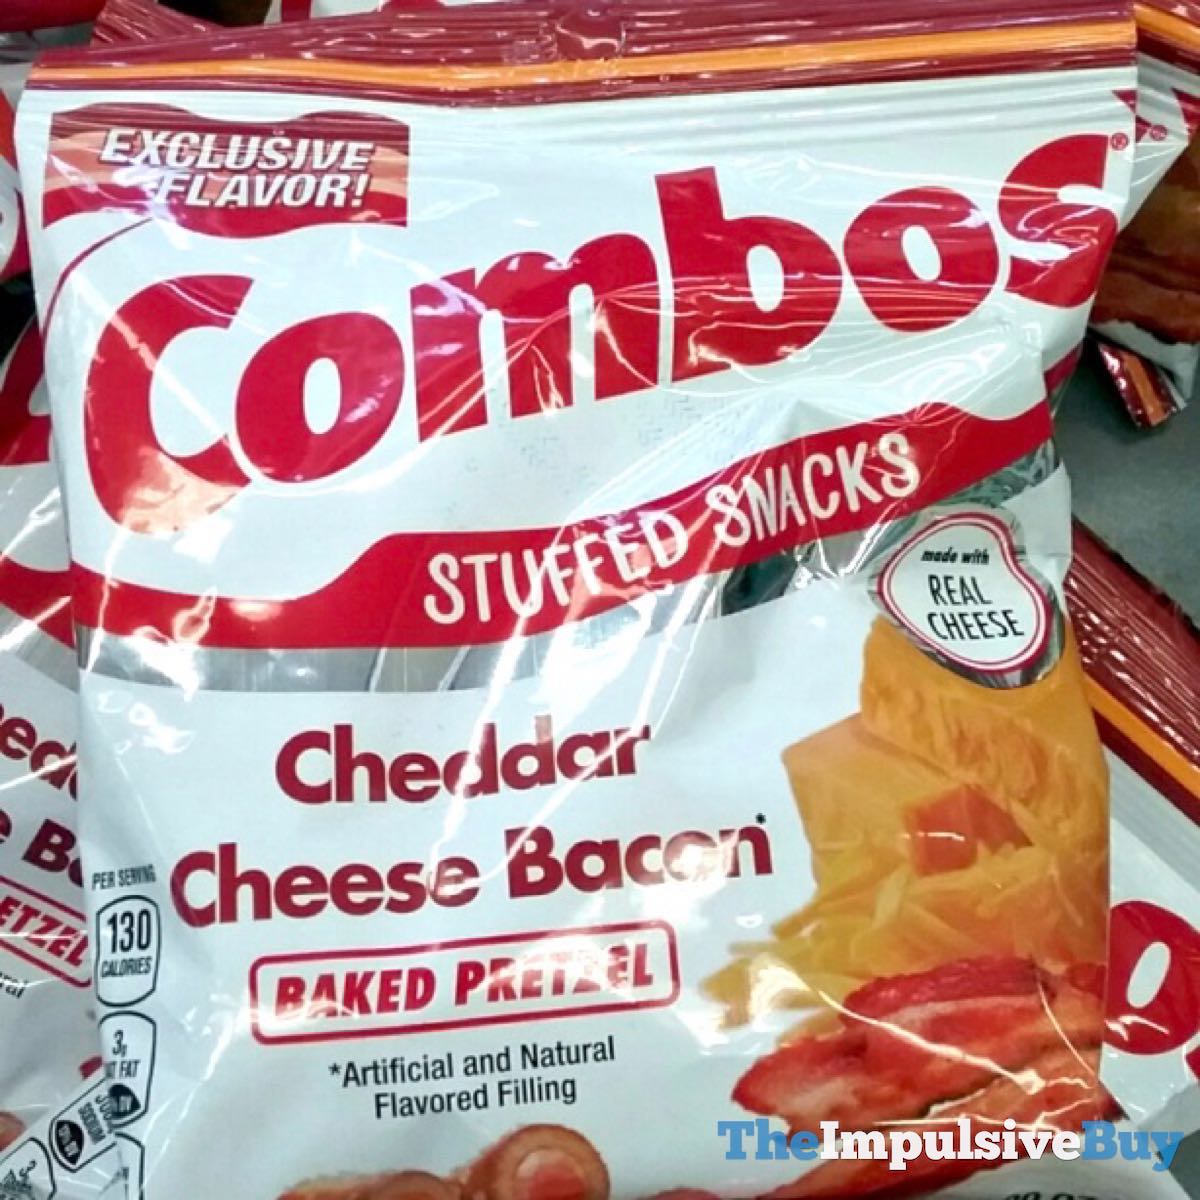 BACK ON SHELVES: Combos Cheddar Cheese Bacon - The Impulsive Buy